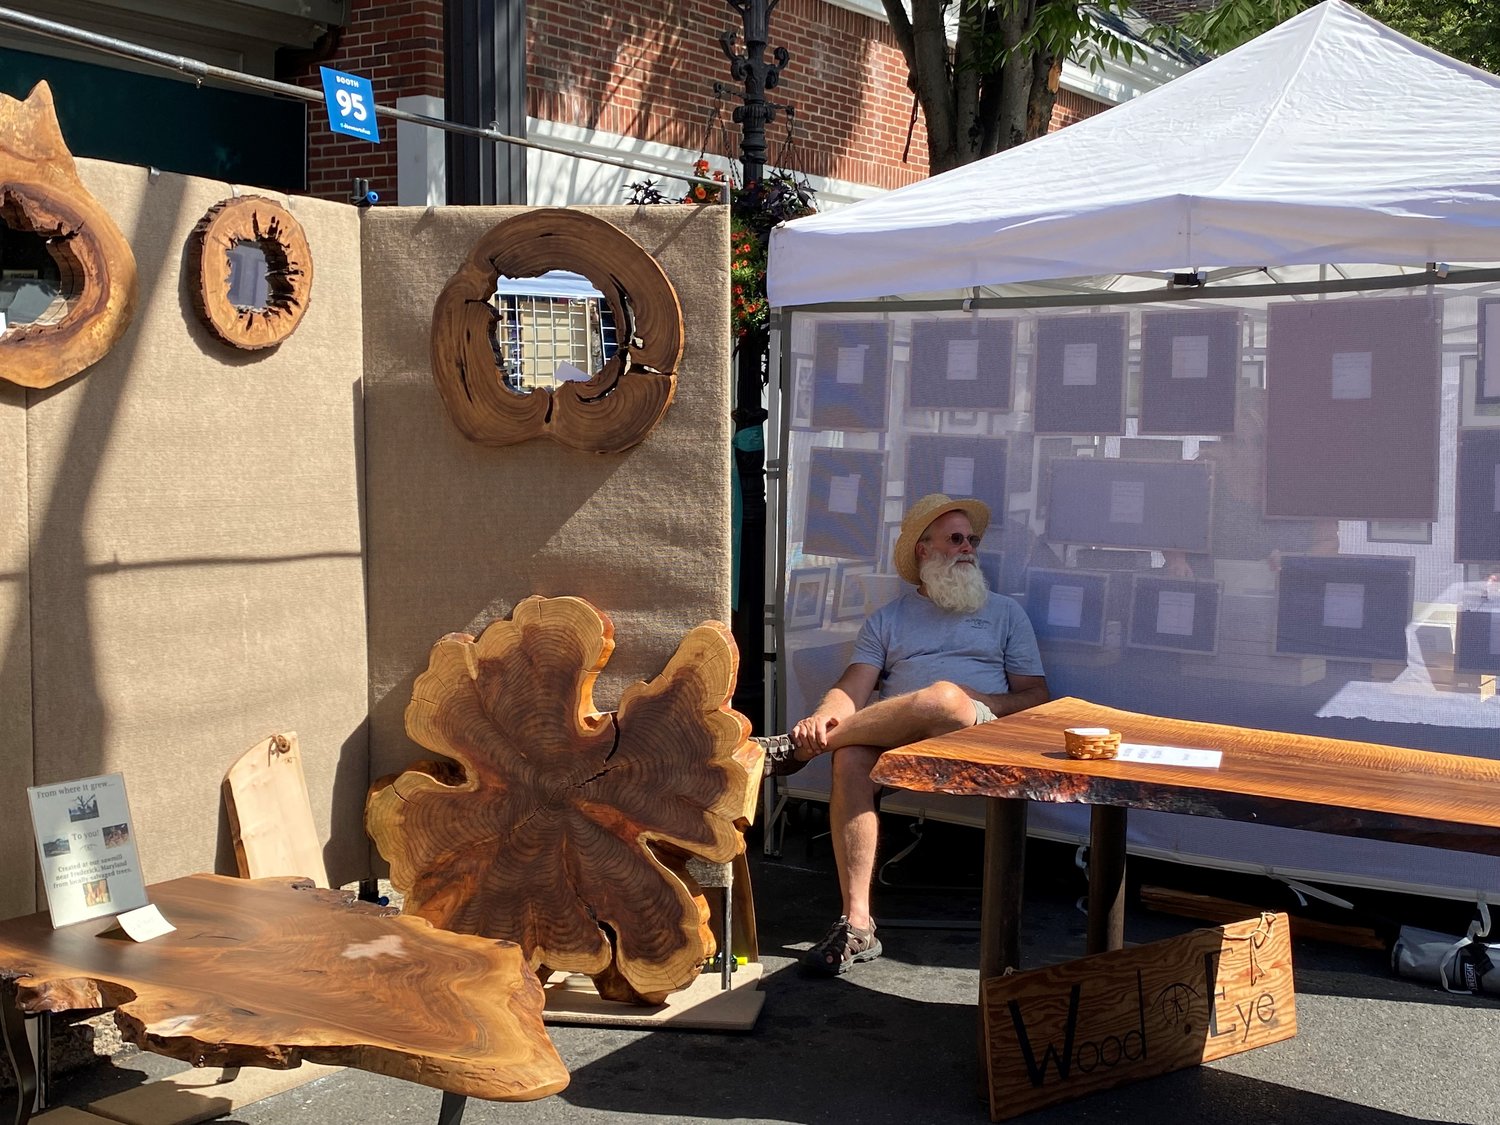 A woodworker takes a rest during the Doylestown Arts Festival last weekend.